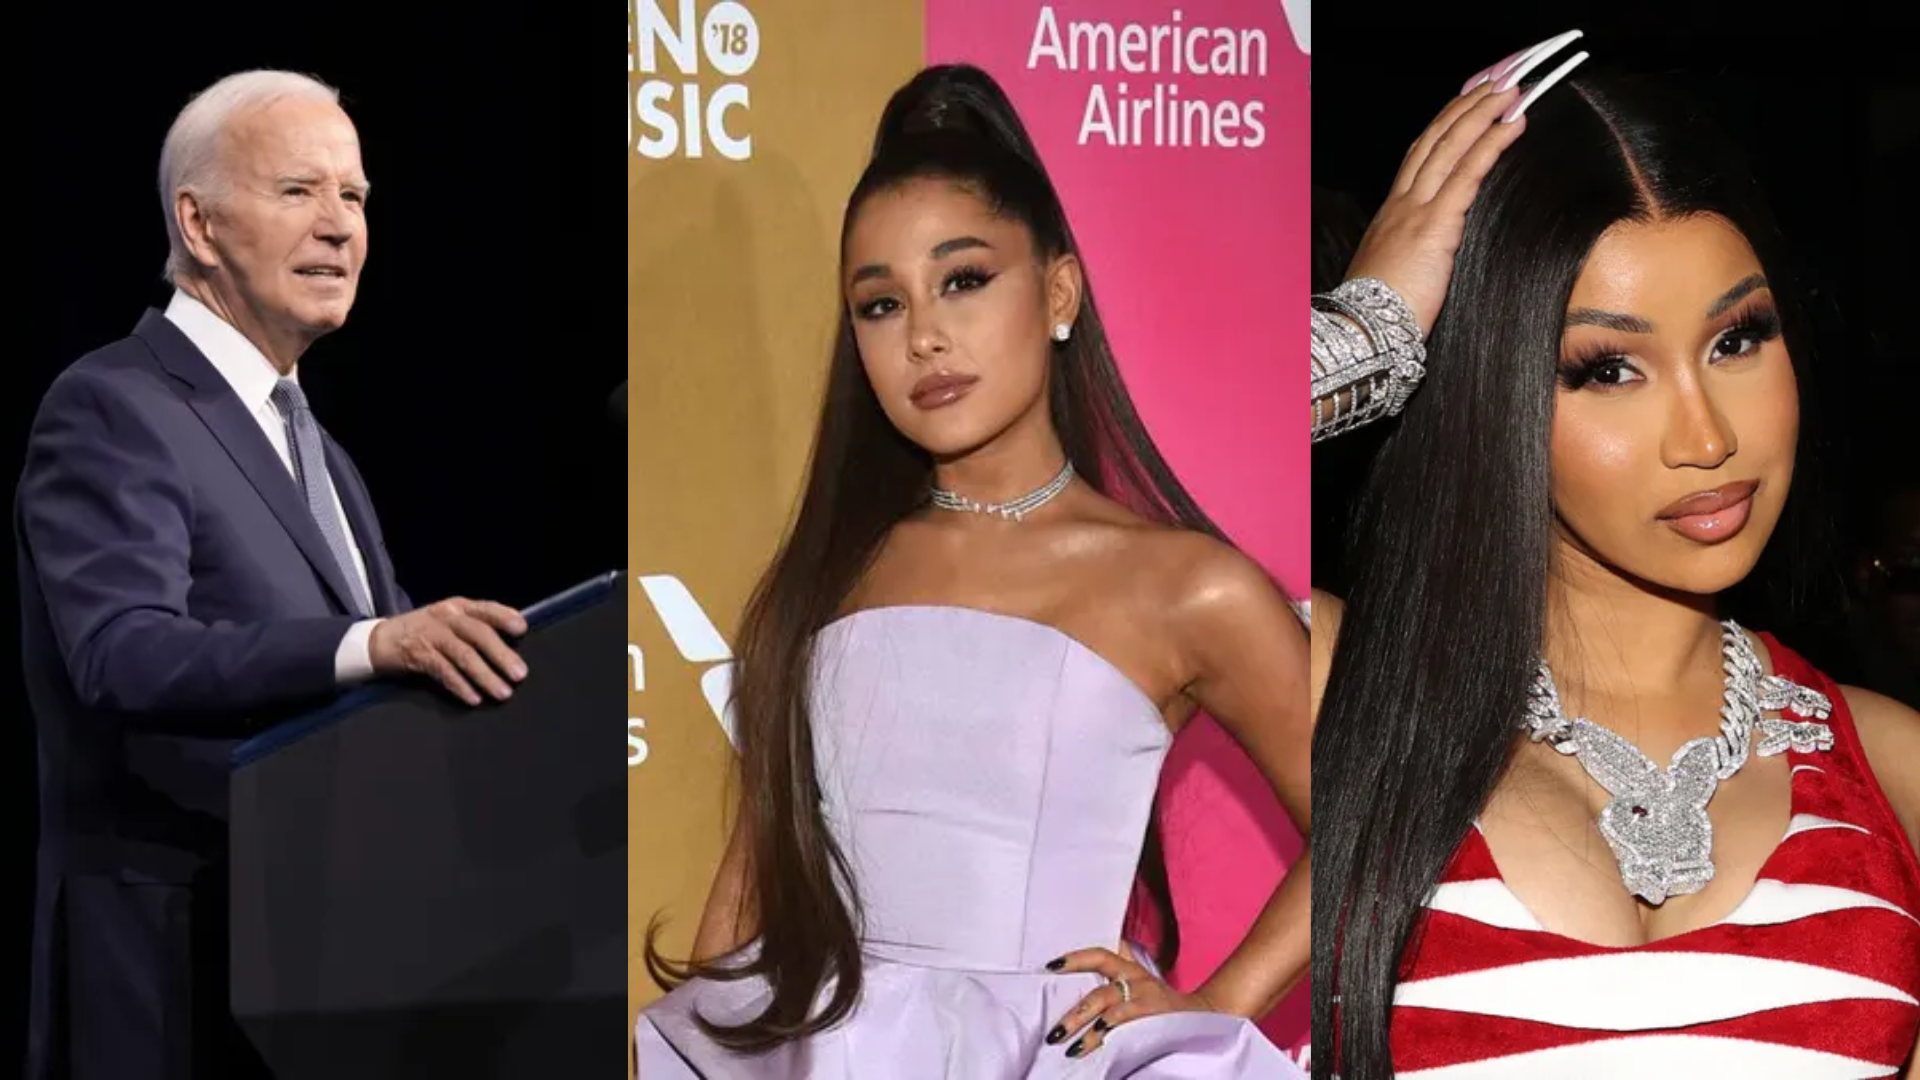 Biden’s Exit Sparks Celeb Reactions: From Cardi B To Ariana Grande, Support Grows For Kamala Harris